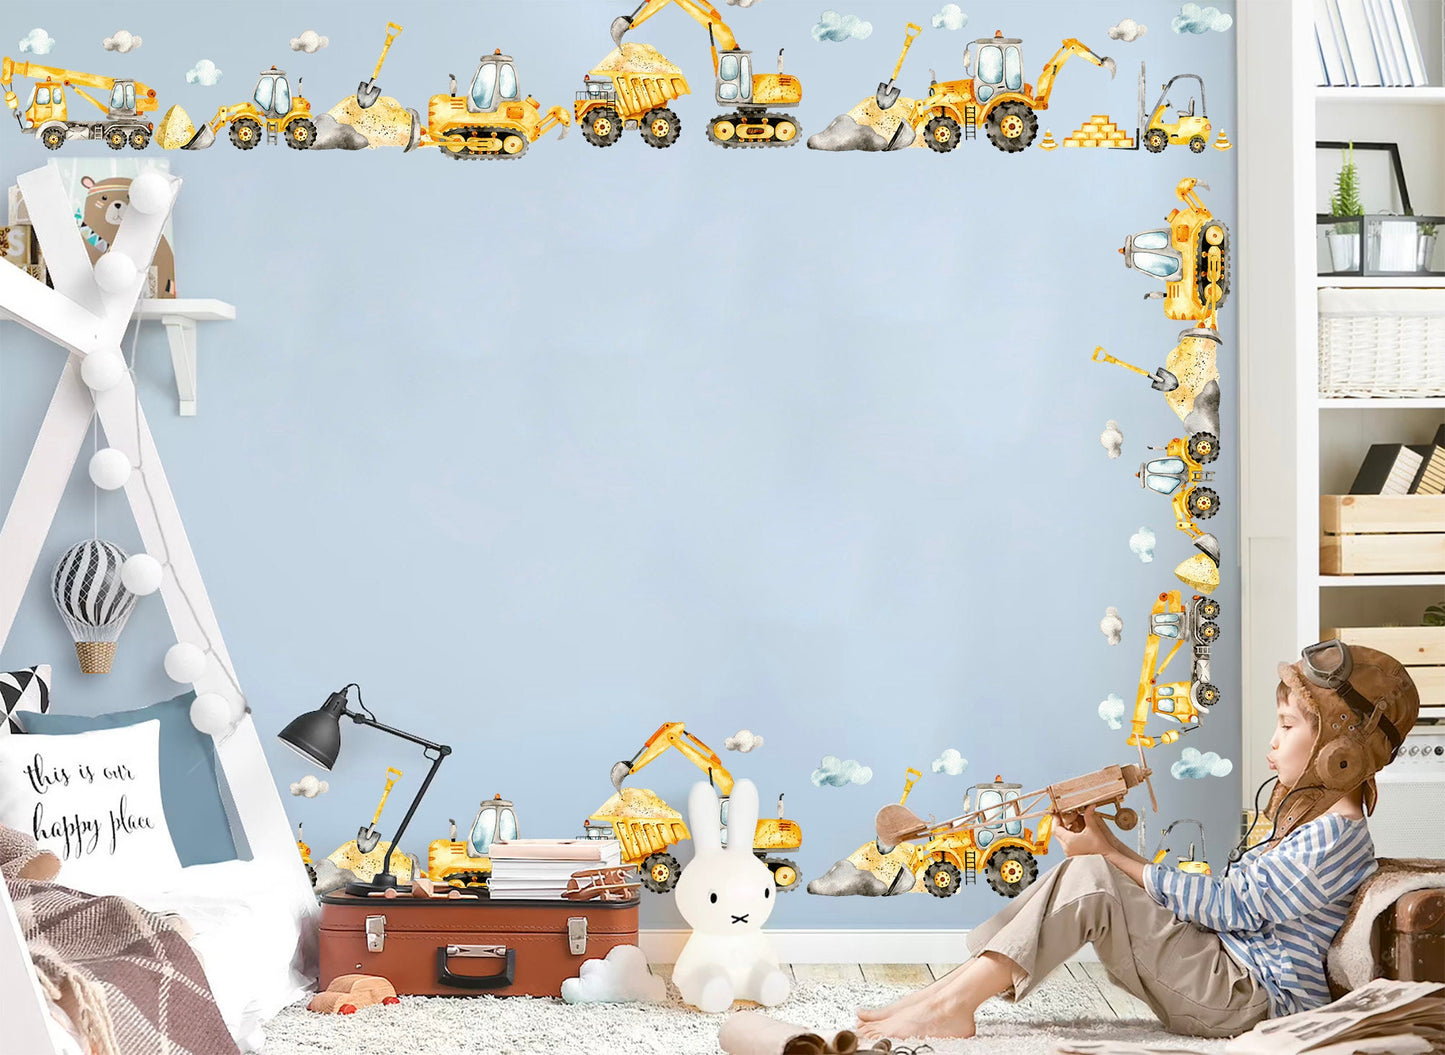 Earthmover Trilogy Truck Crane Excavator Construction Vehicle Removable Wall Decal Boy Room Decor - BR132